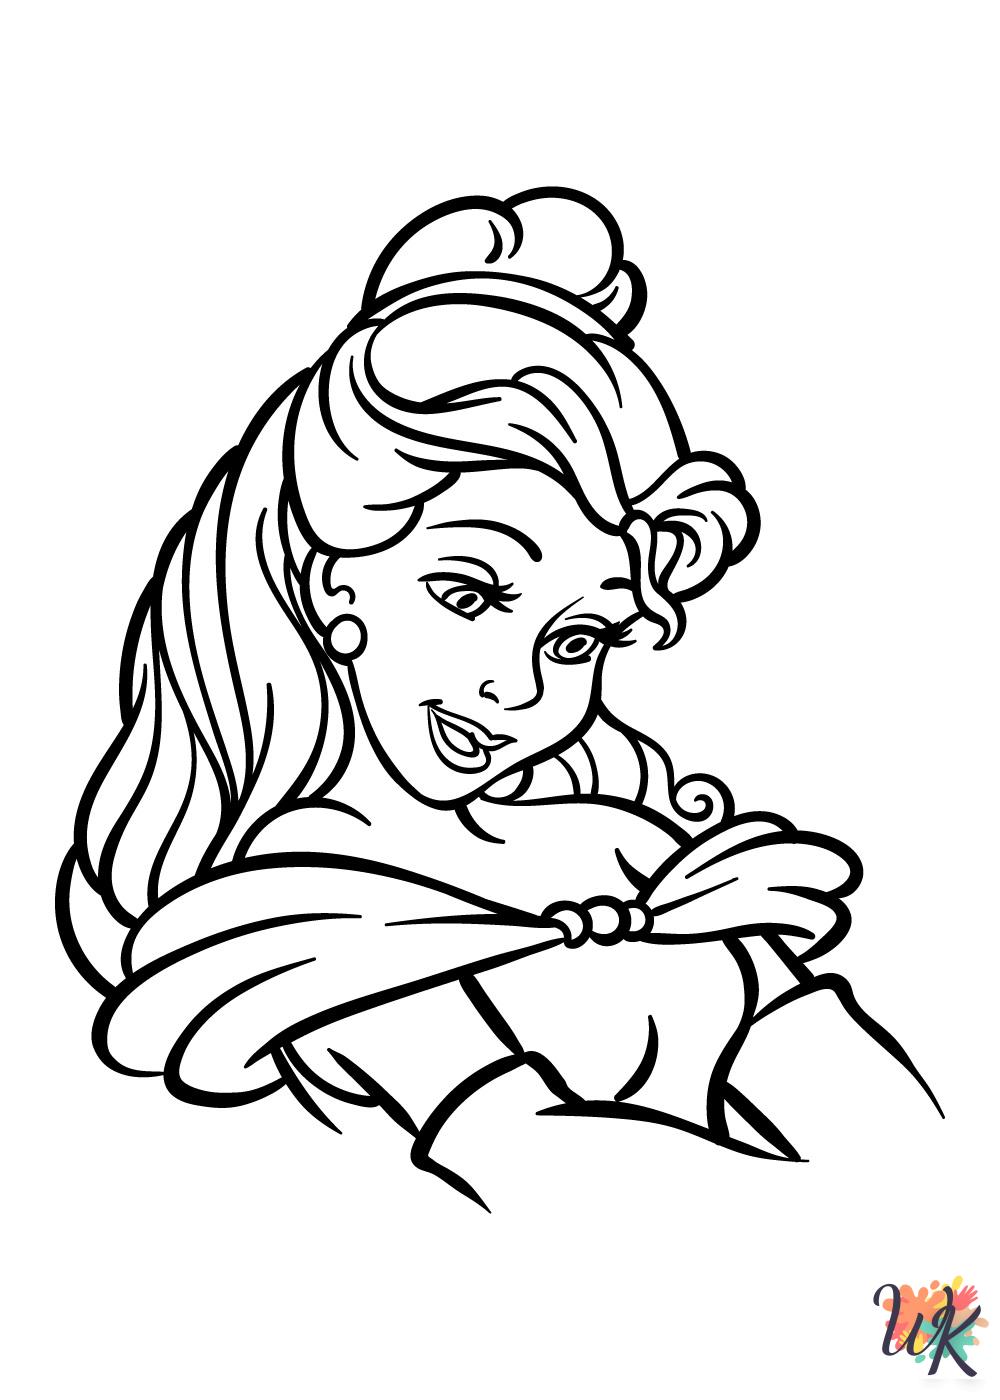 Belle free coloring pages